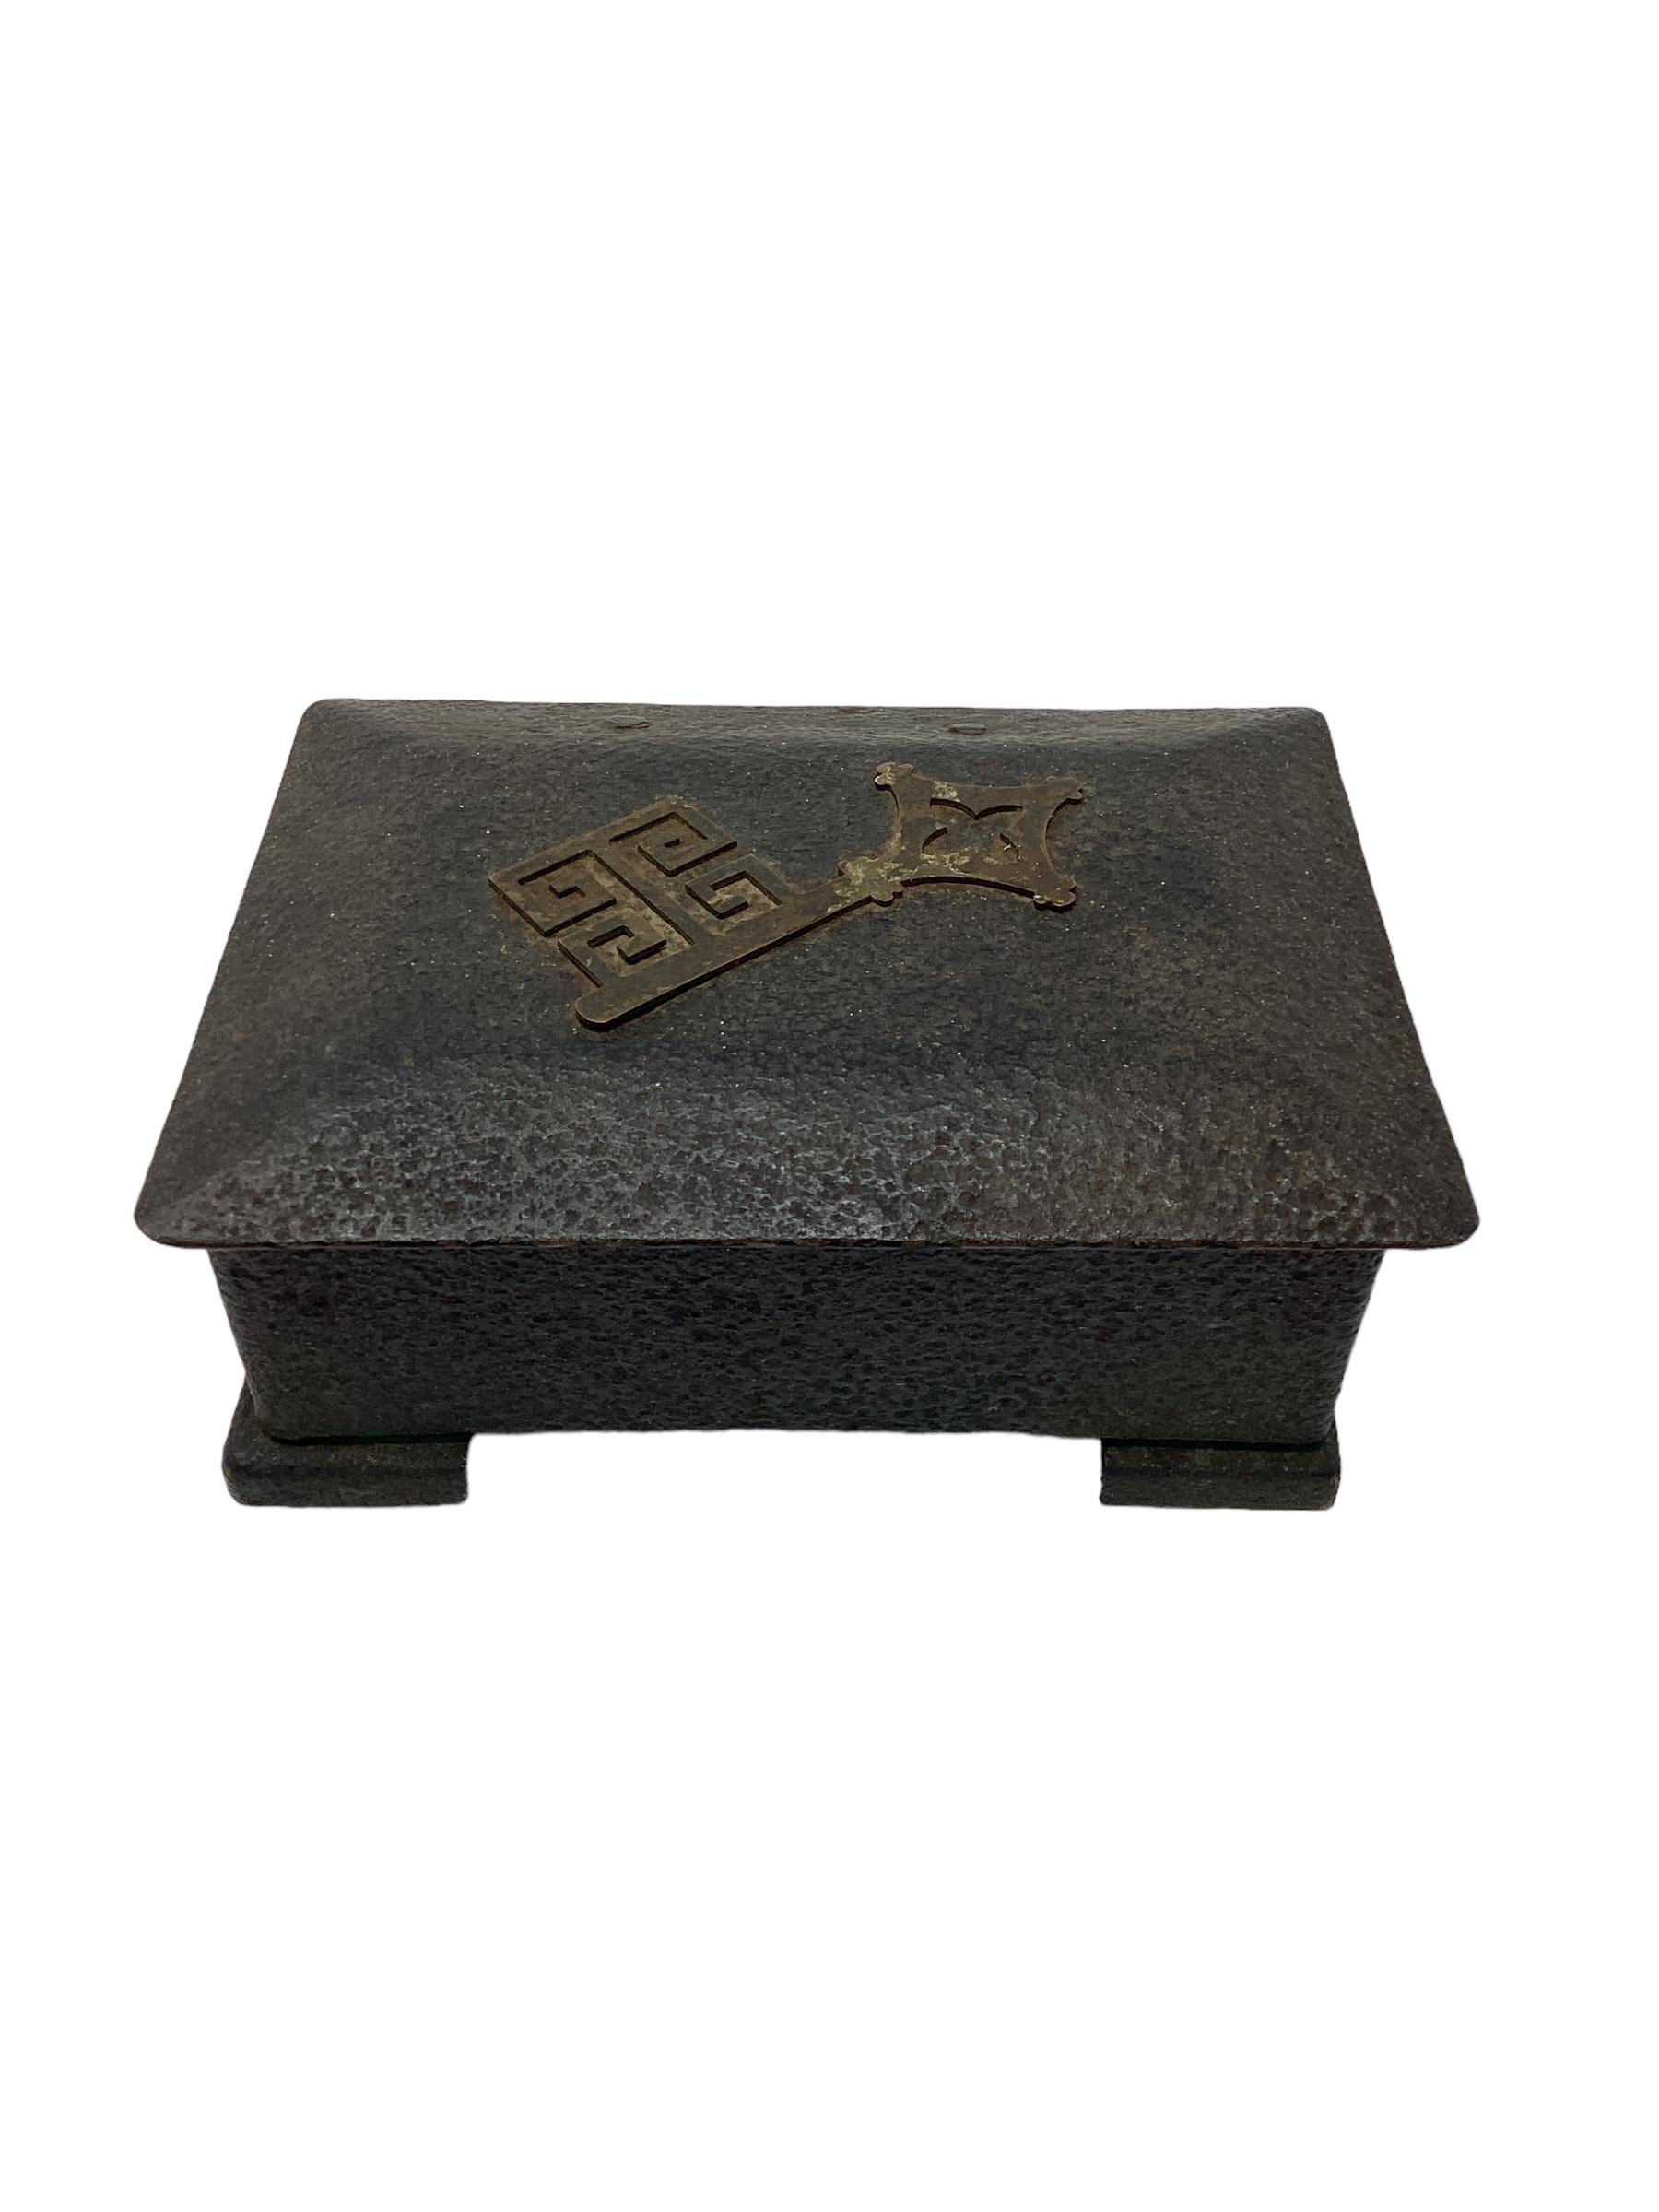 Antique Bronze Verdigris Box with with Applied Greek Key Decoration. Box is wood lined and would have held cigarettes or trinkets. 